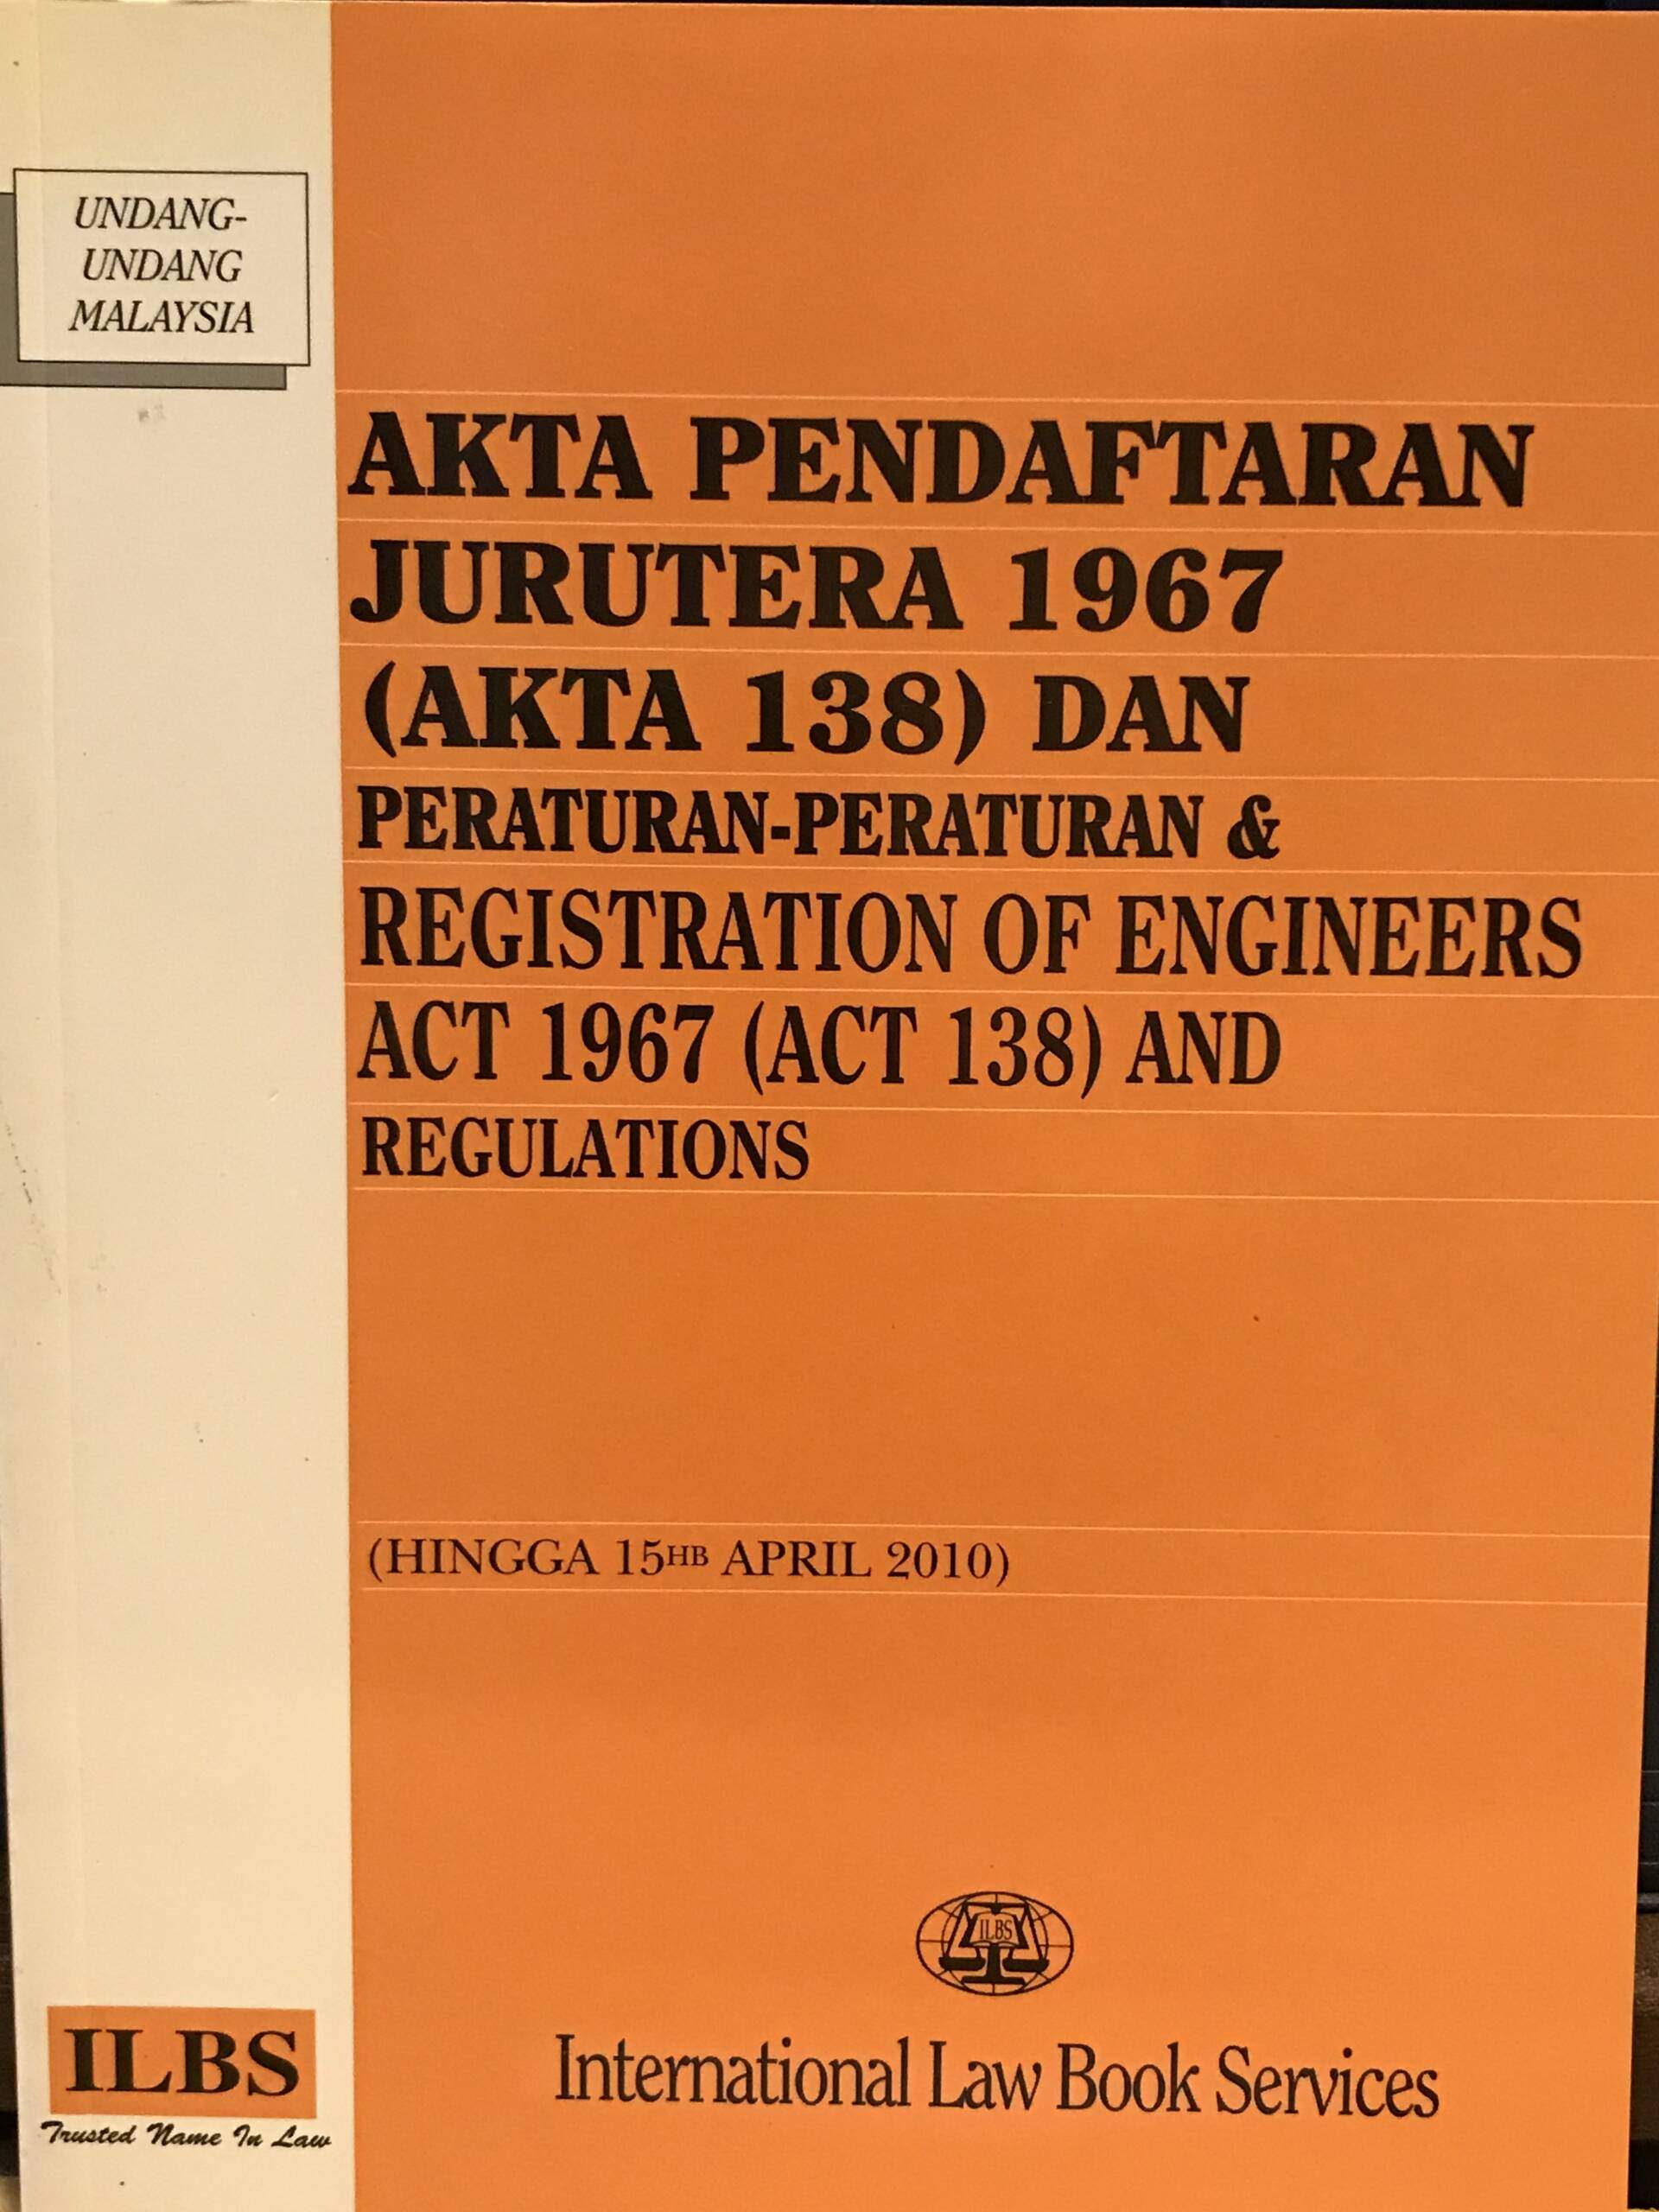 Registration Of Engineers Act 1967 Act 138 And Regulations Together With Malay Version Marsden Professional Law Book